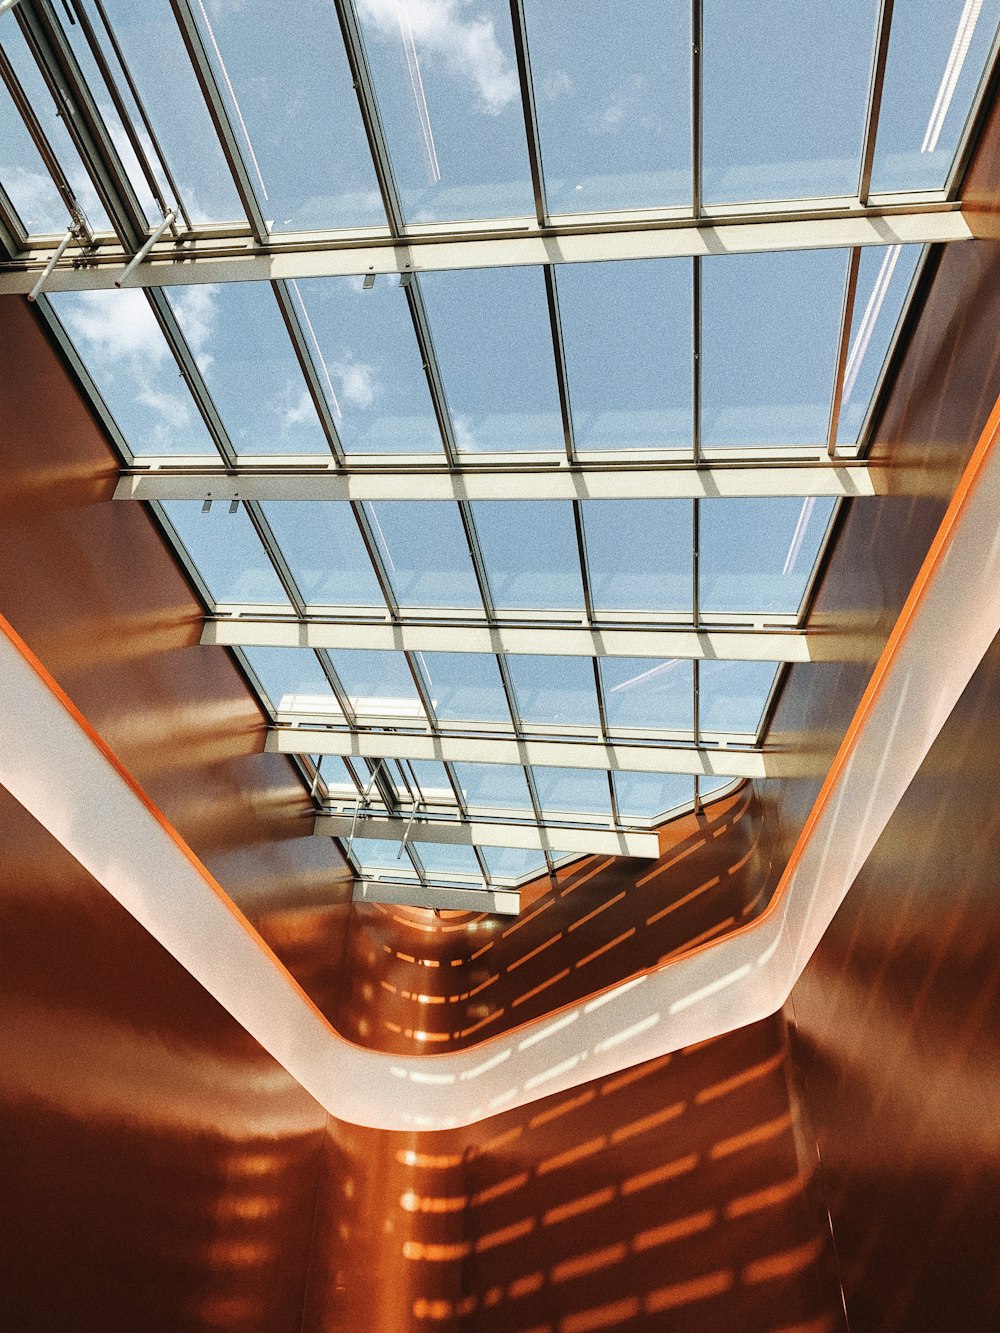 a view of a skylight in a building